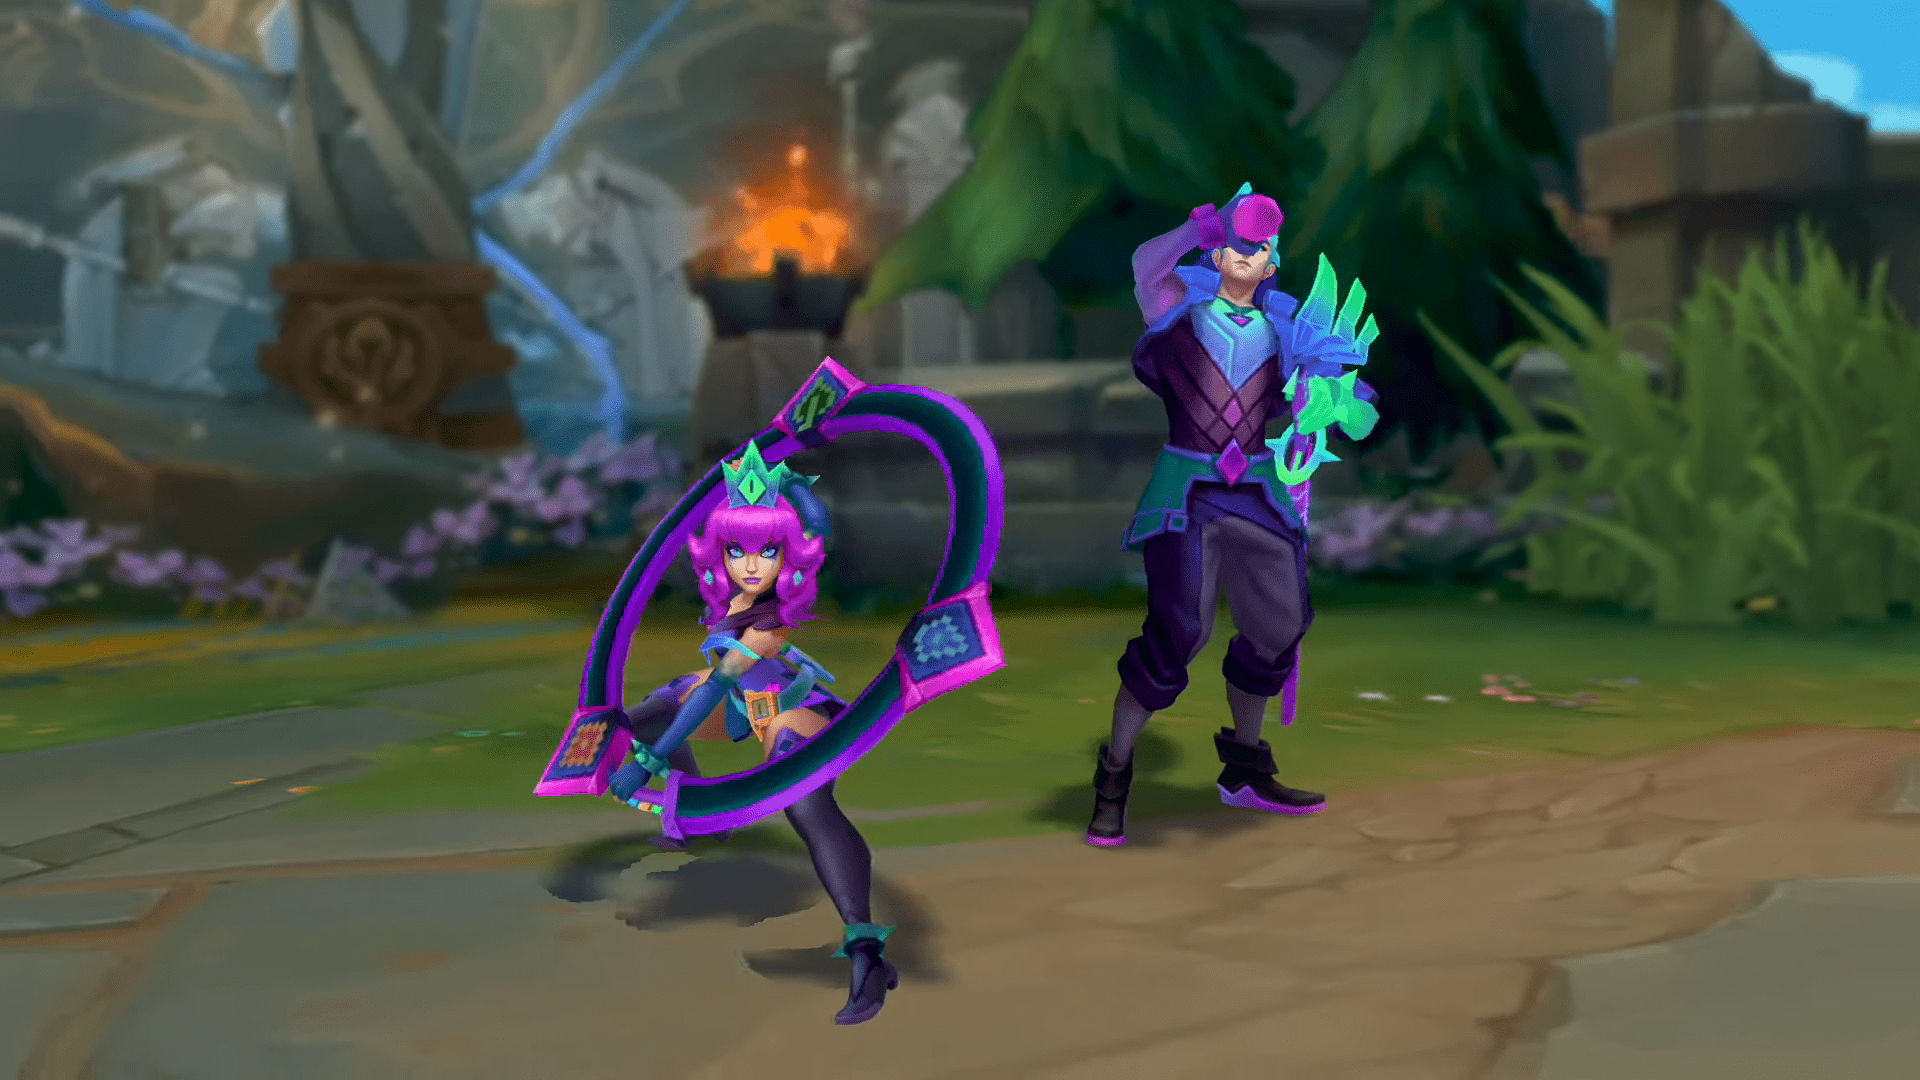 2019 Arcade Event For League Of Legends: New Skins, Missions, And Special Loot